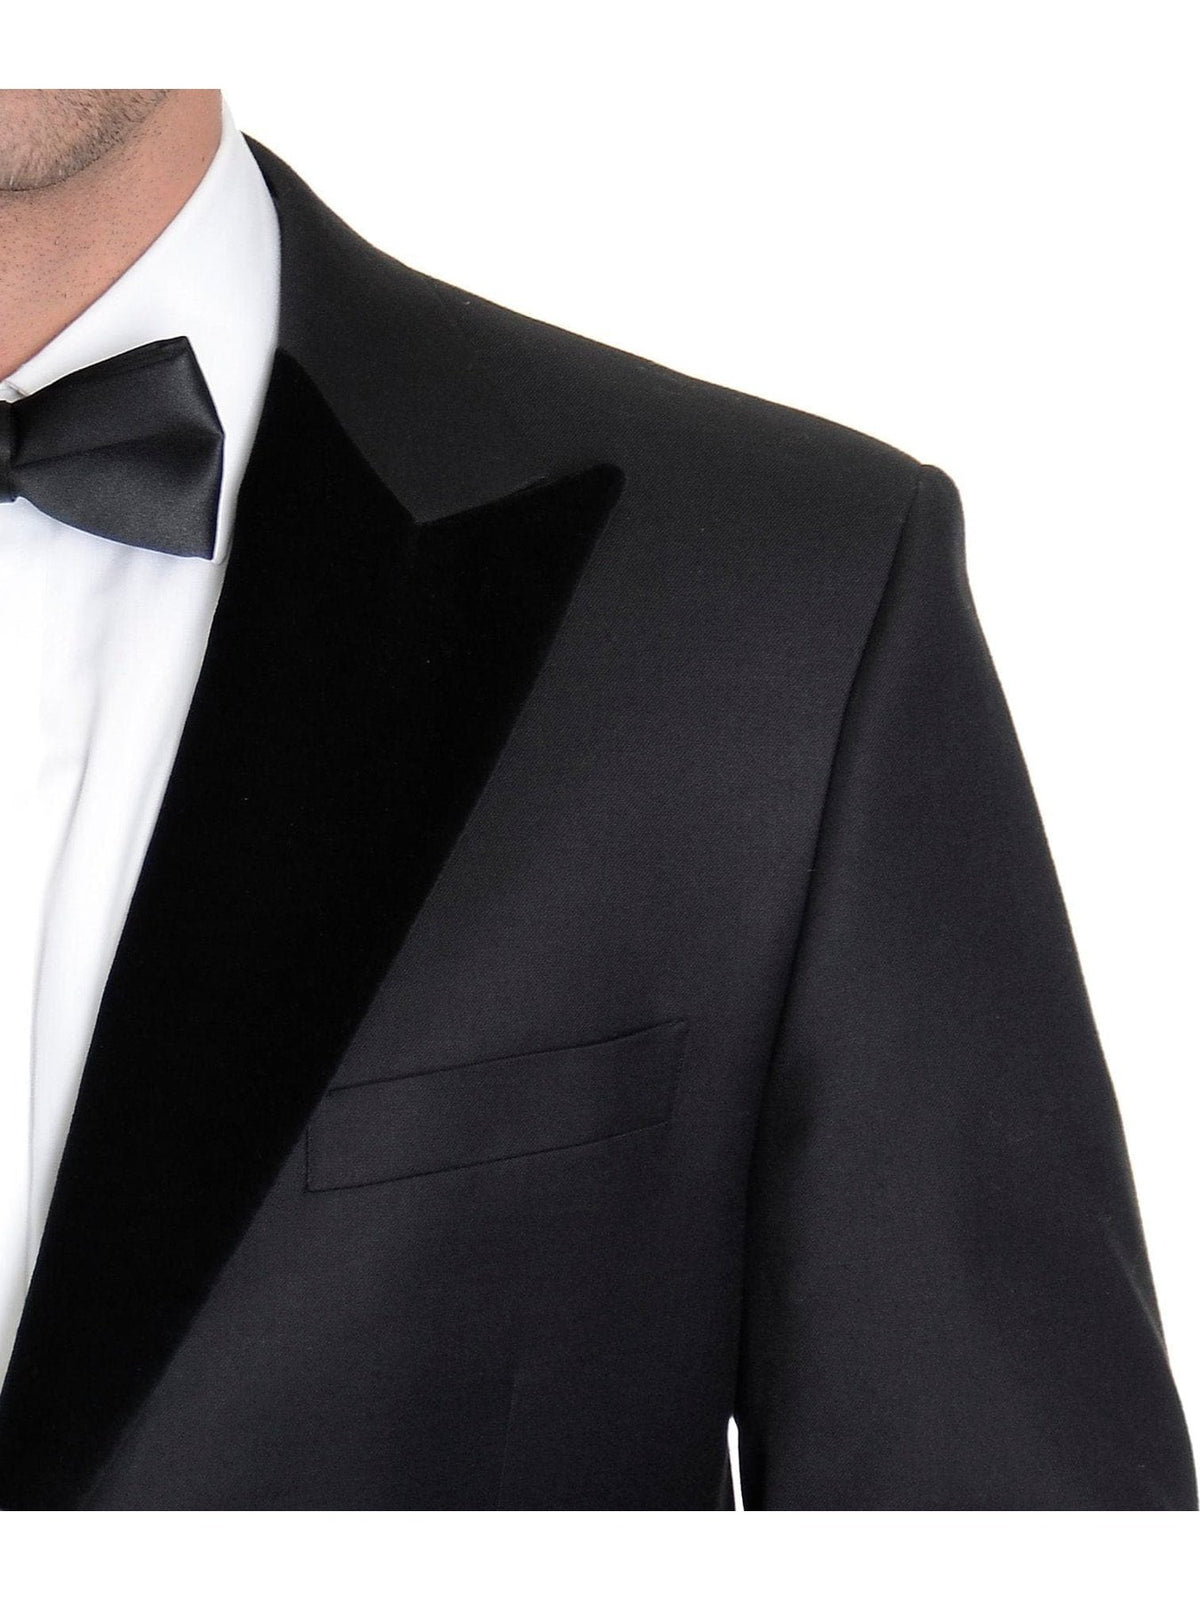 Label M TUXEDOS Modern Fit Solid Black One Button Wool Blend Tuxedo Suit With Peak Lapels